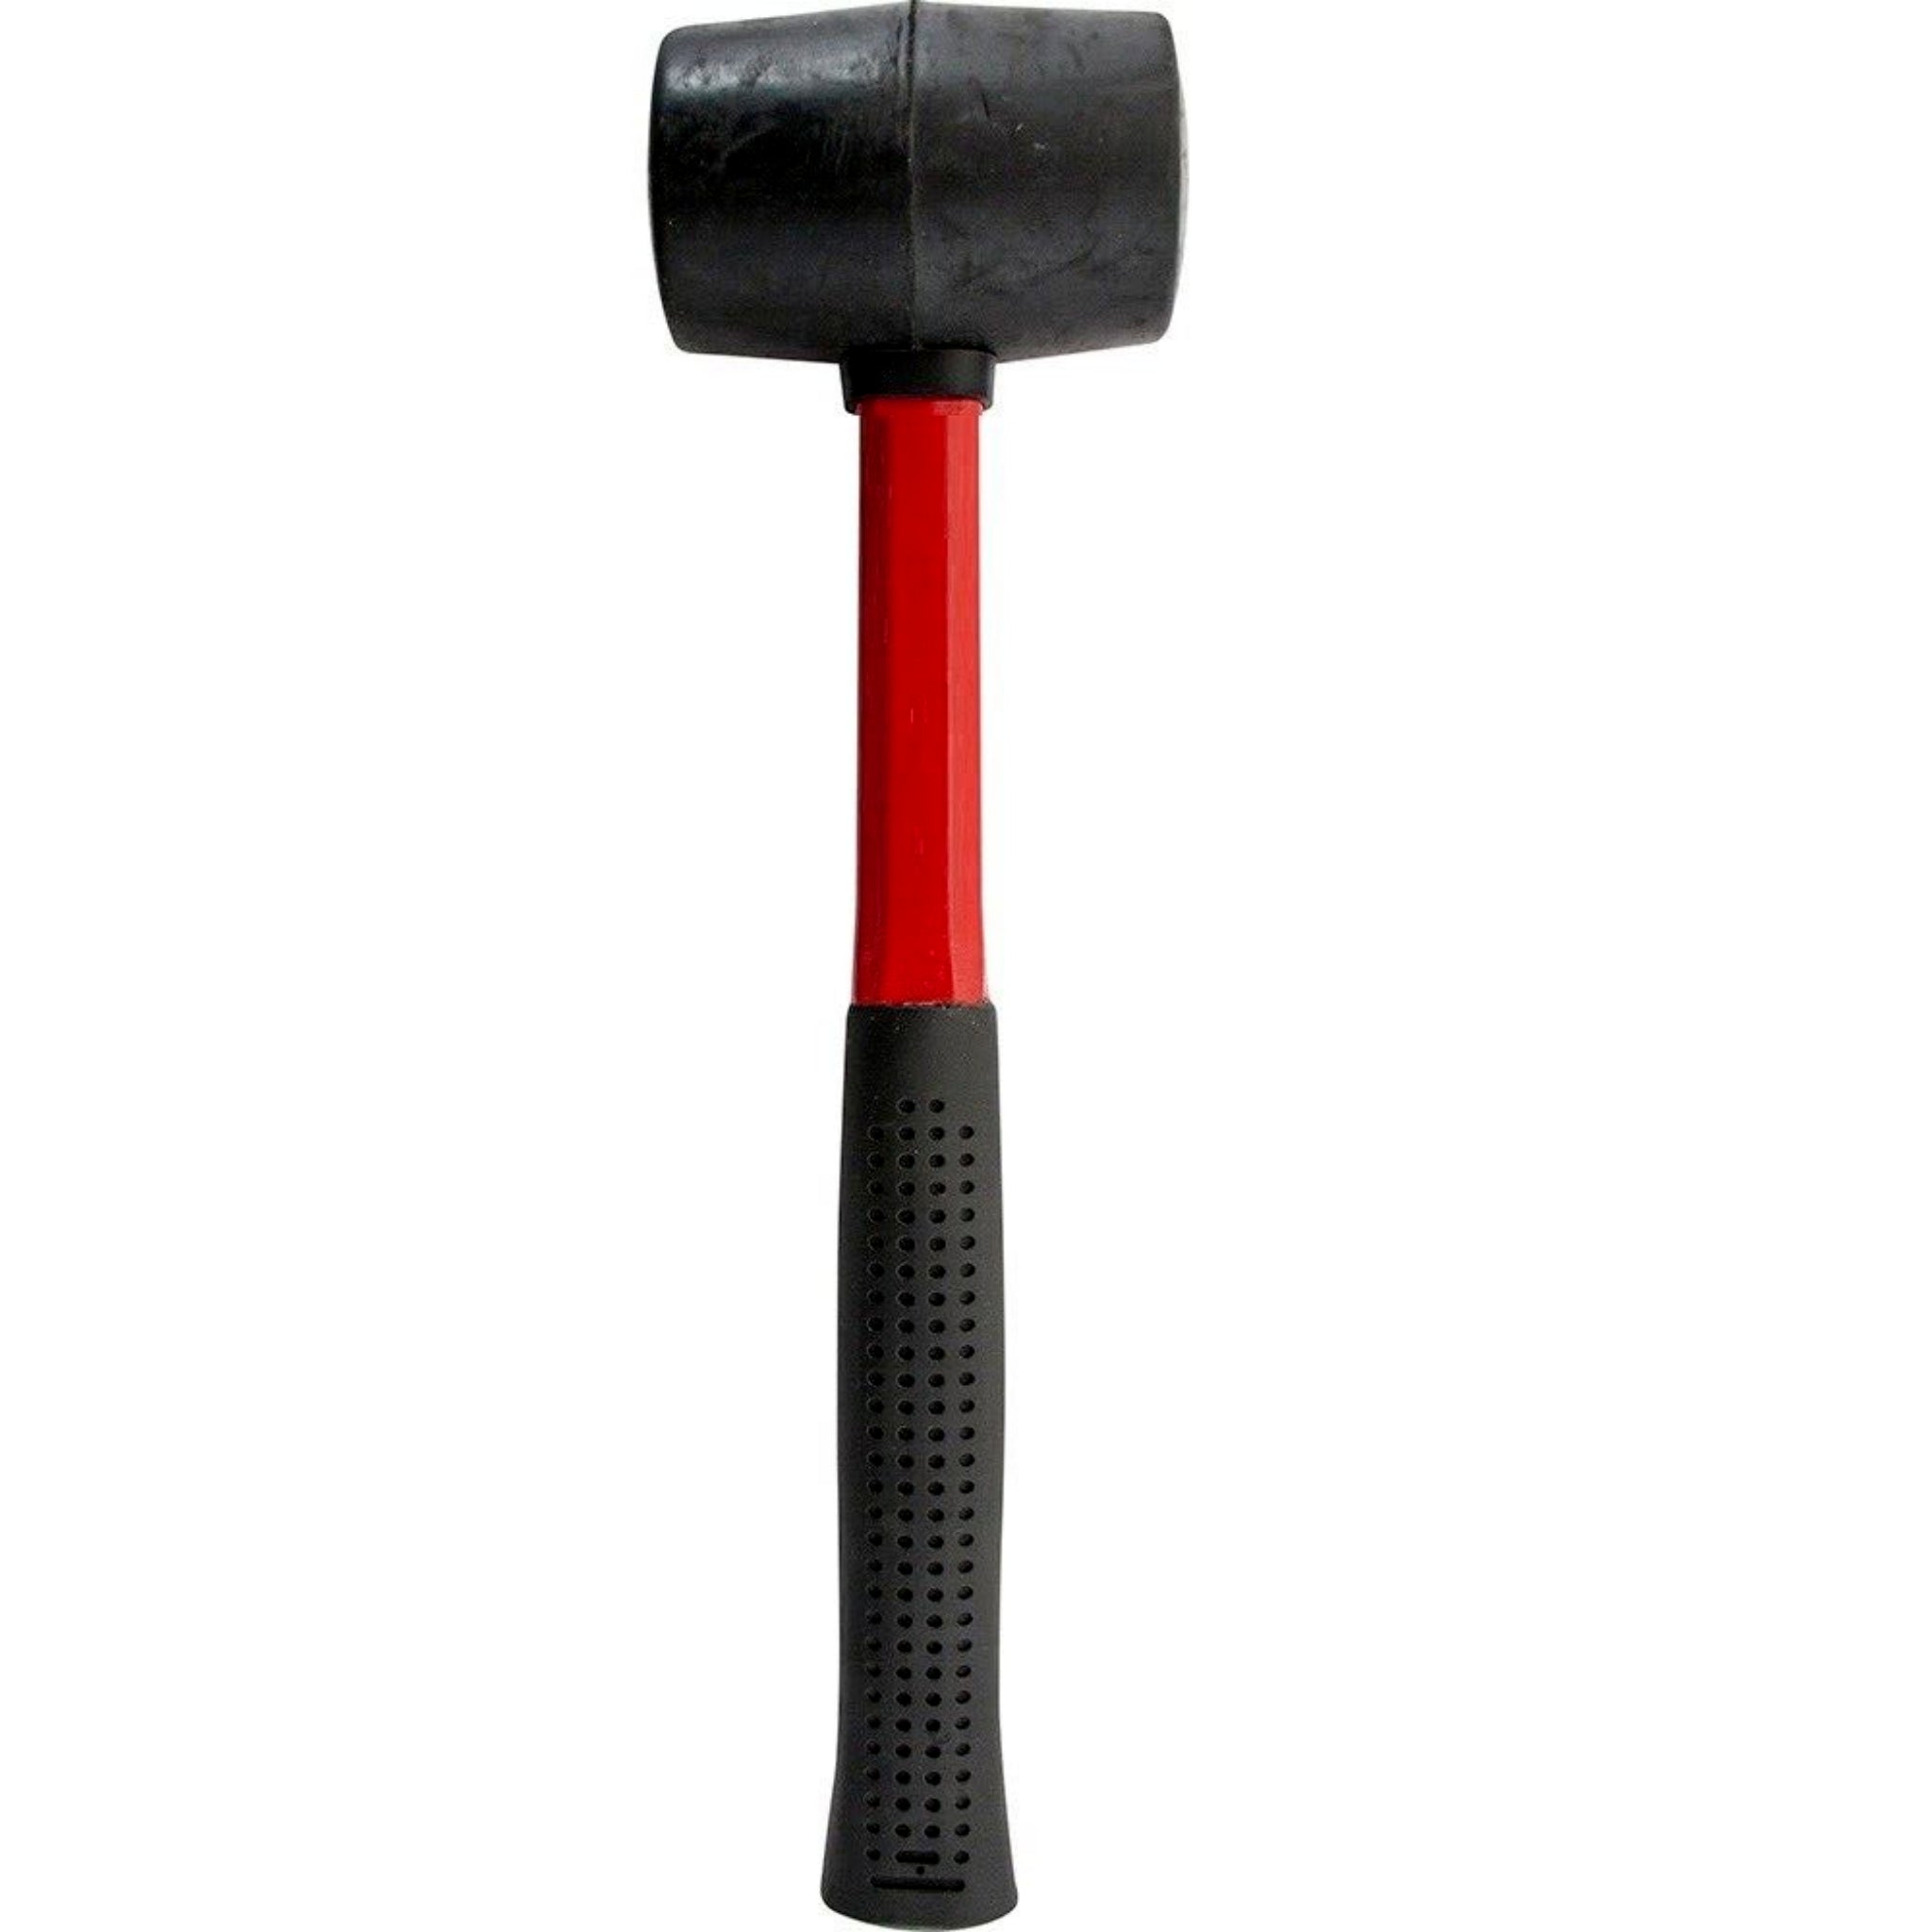 Beclen Harp 16oz Rubber Mallet Shaft Grip Handle Fiberglass Hammer- Perfect DIY Tool For Camping And Paving